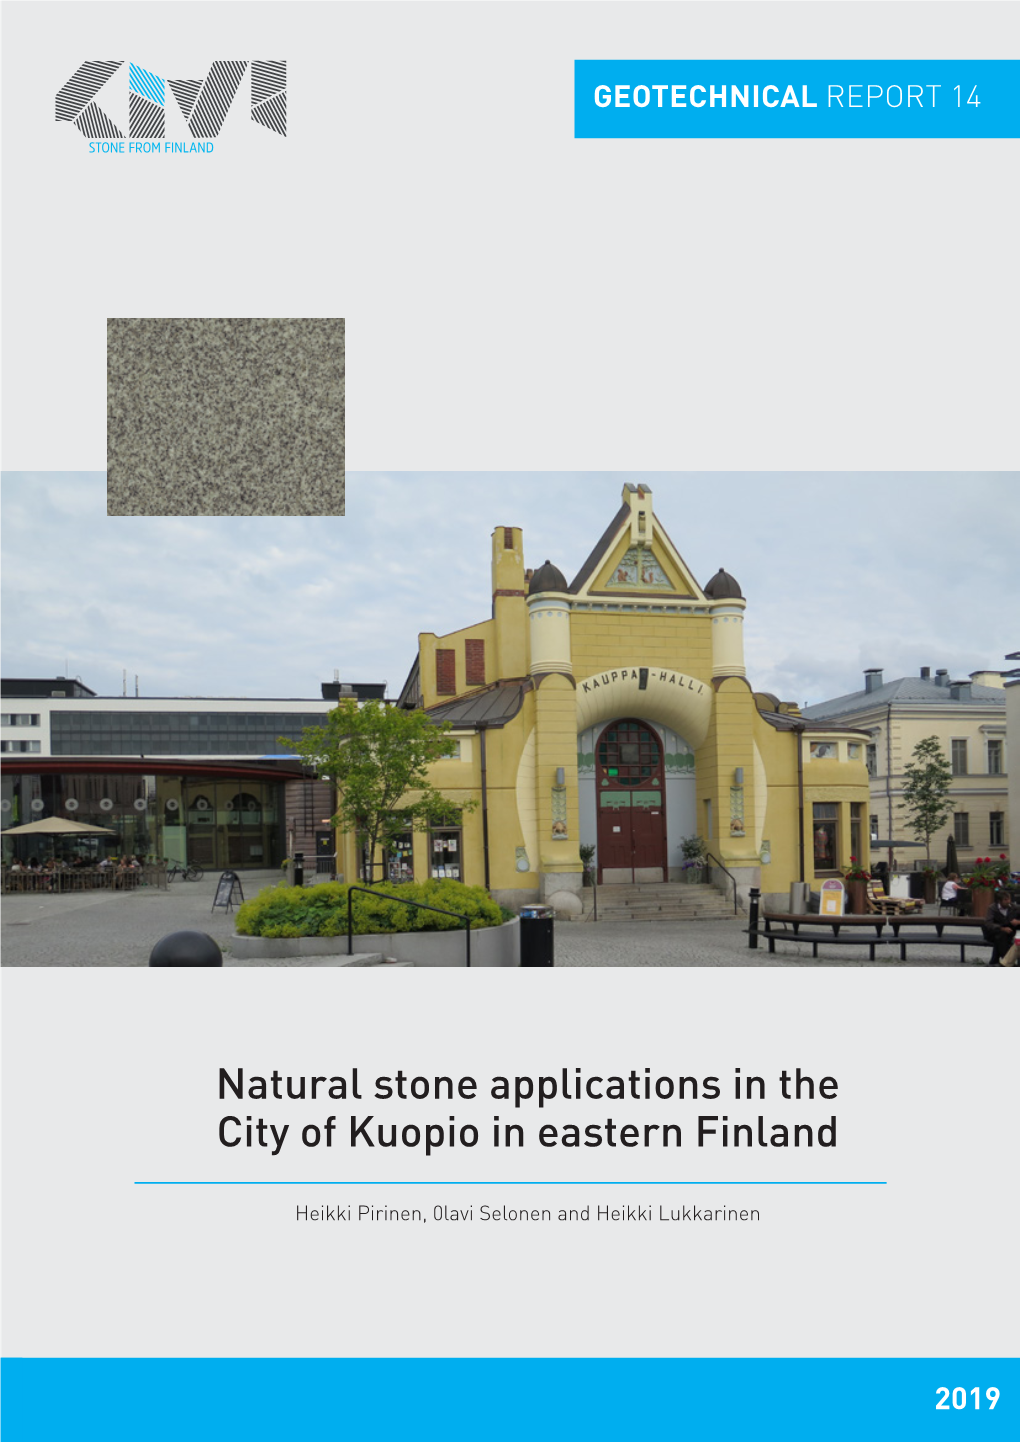 Natural Stone Applications in the City of Kuopio in Eastern Finland